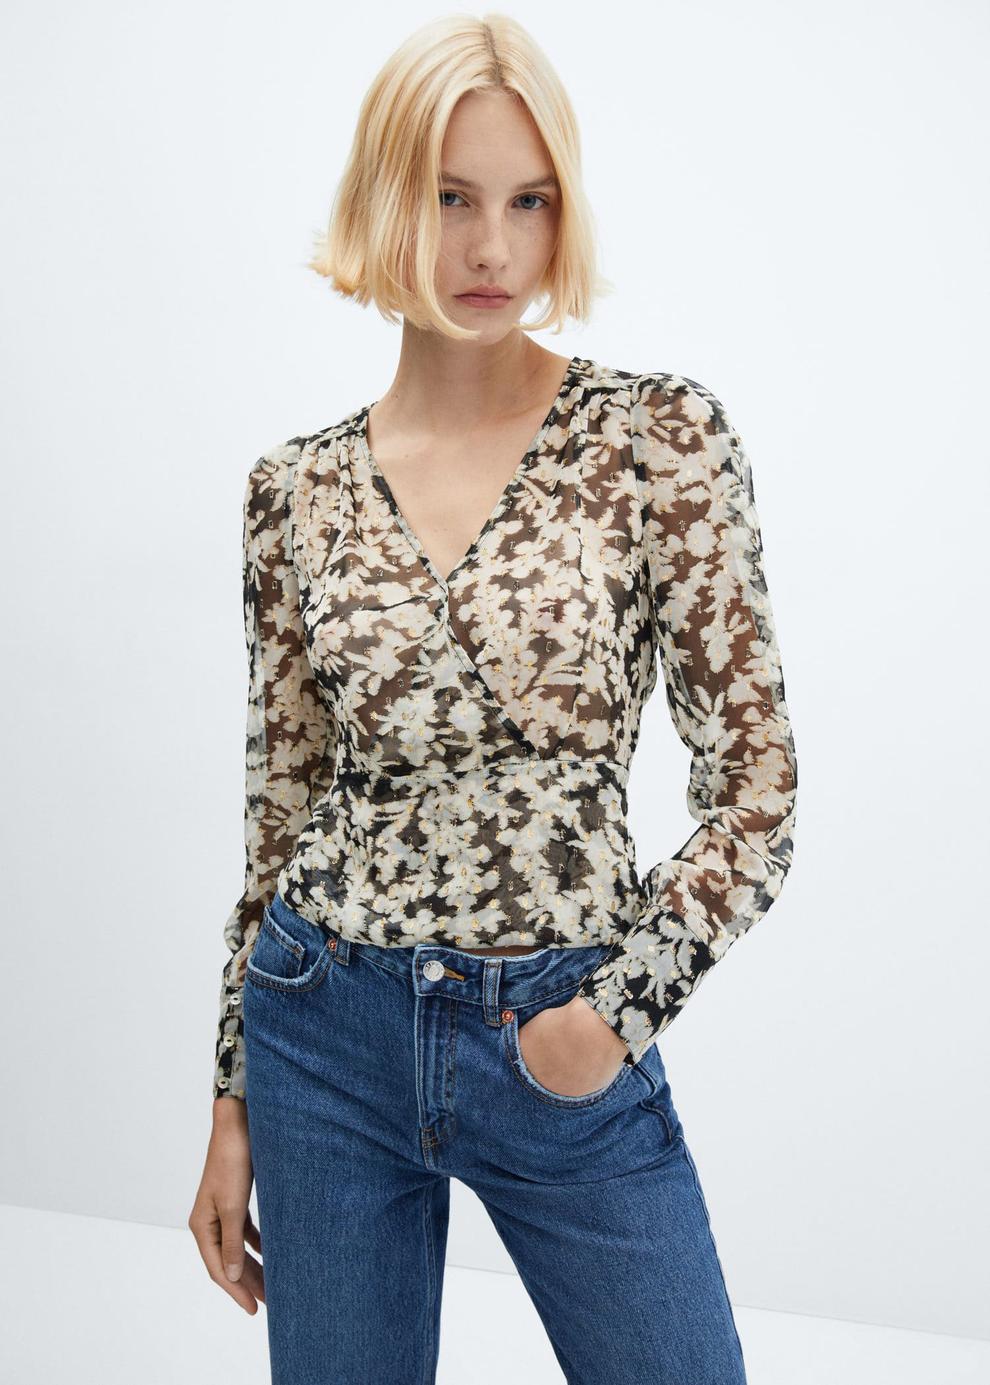 Floral print crossover blouse offers at $44.99 in Mango